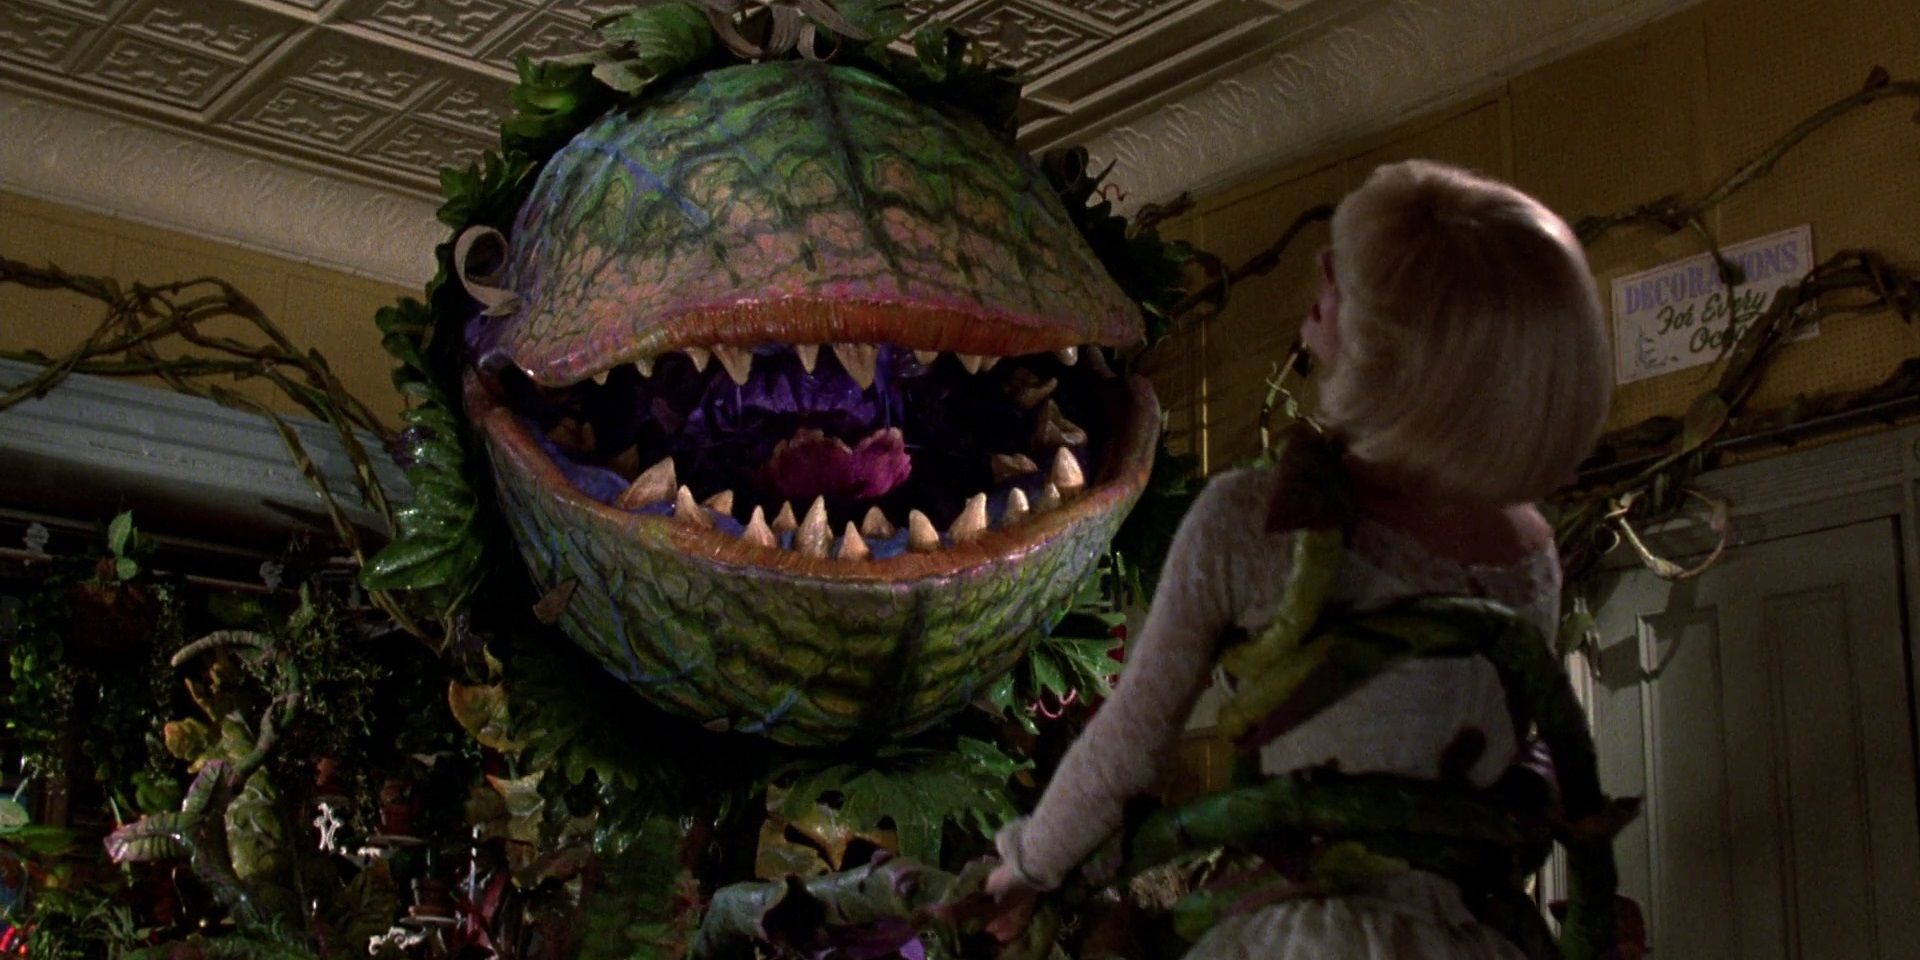 Audrey in the 1986 remake of Little Shop of Horrors